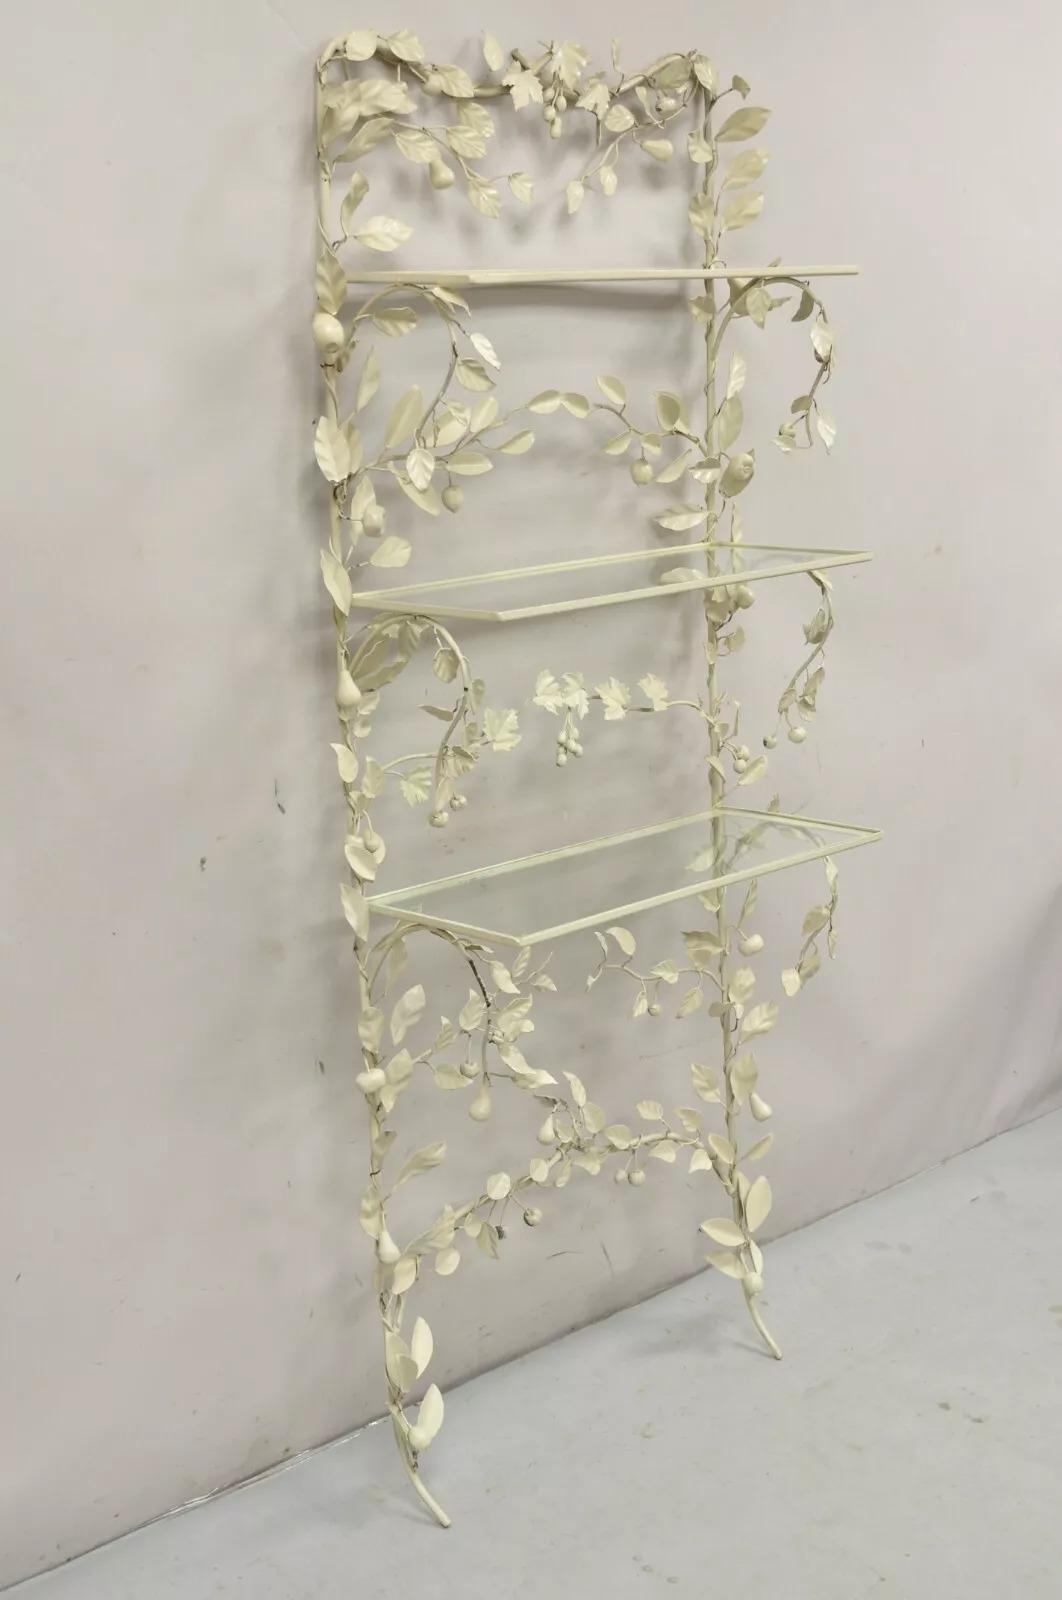 Vintage Italian Hollywood Regency Iron Tole Metal Fruit Vine Wall Hanging Shelf. Item features 3 glass shelves, maple leaf and fruit vine cream/white painted iron frame, very nice vintage wall mounted shelf. Circa  Mid 20th Century. Measurements: